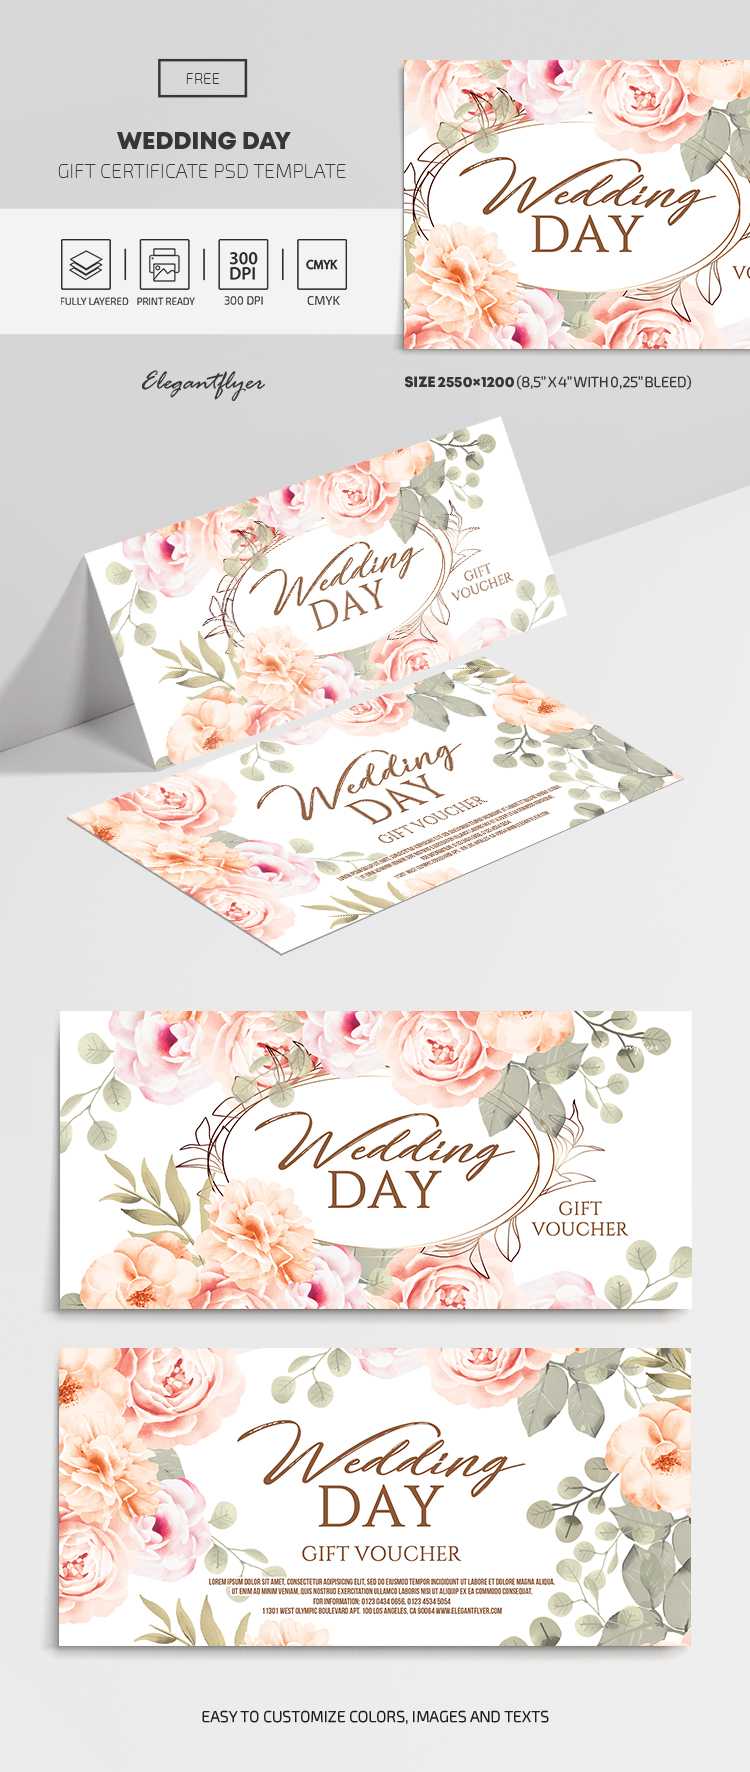 Wedding Day – Free Gift Certificate Template In Psd – With Spa Day Gift Certificate Template